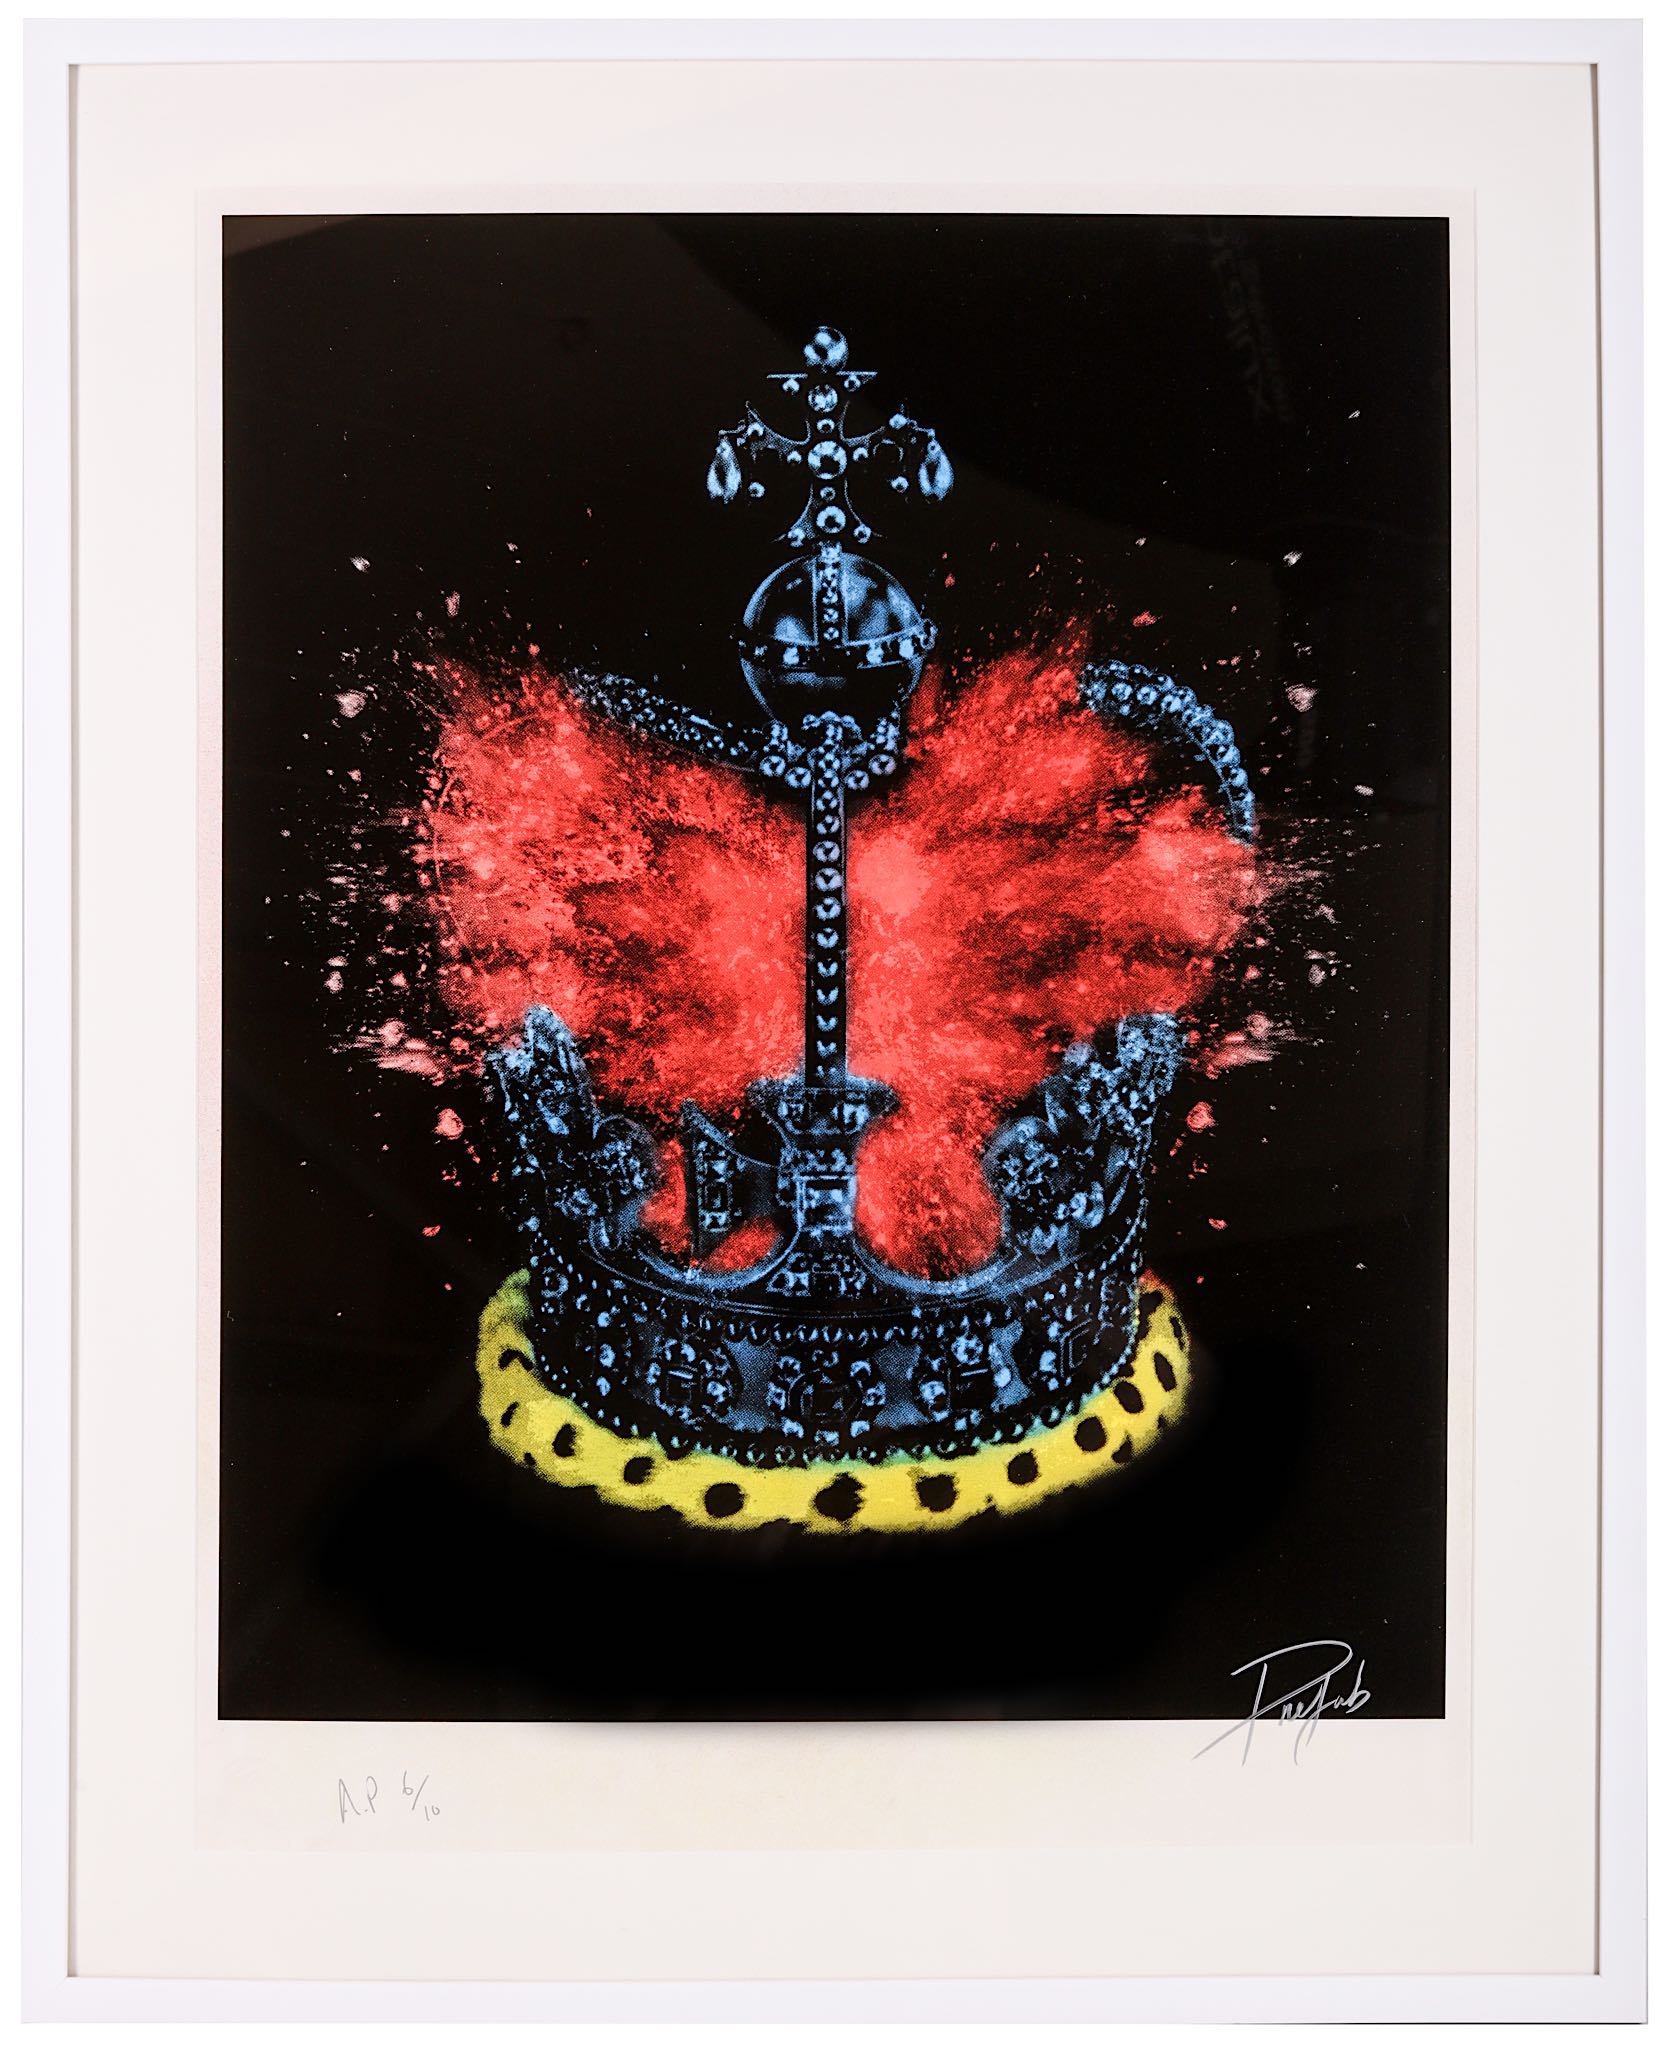 Prefab77 (British) 'Crown & Country', 2011, screenprint in colours, signed and numbered from an